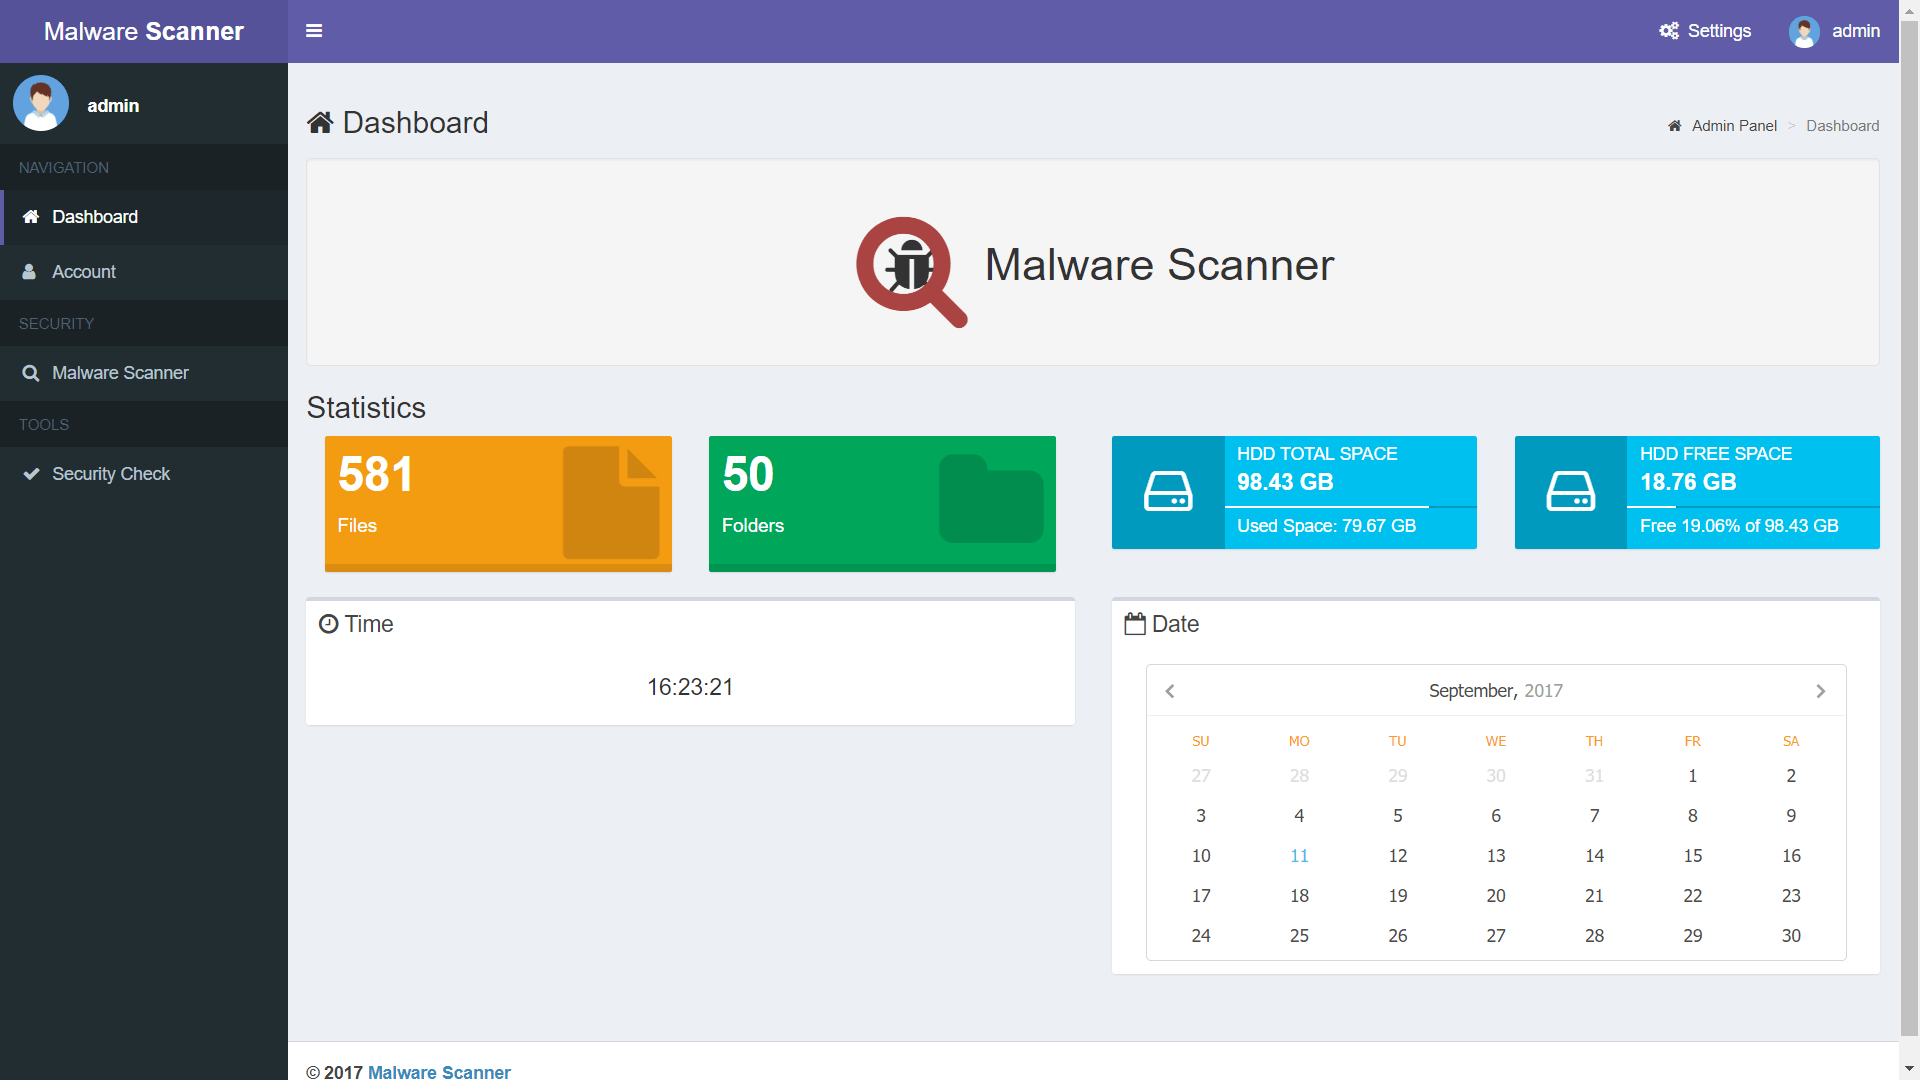 does microsoft safety scanner remove malware